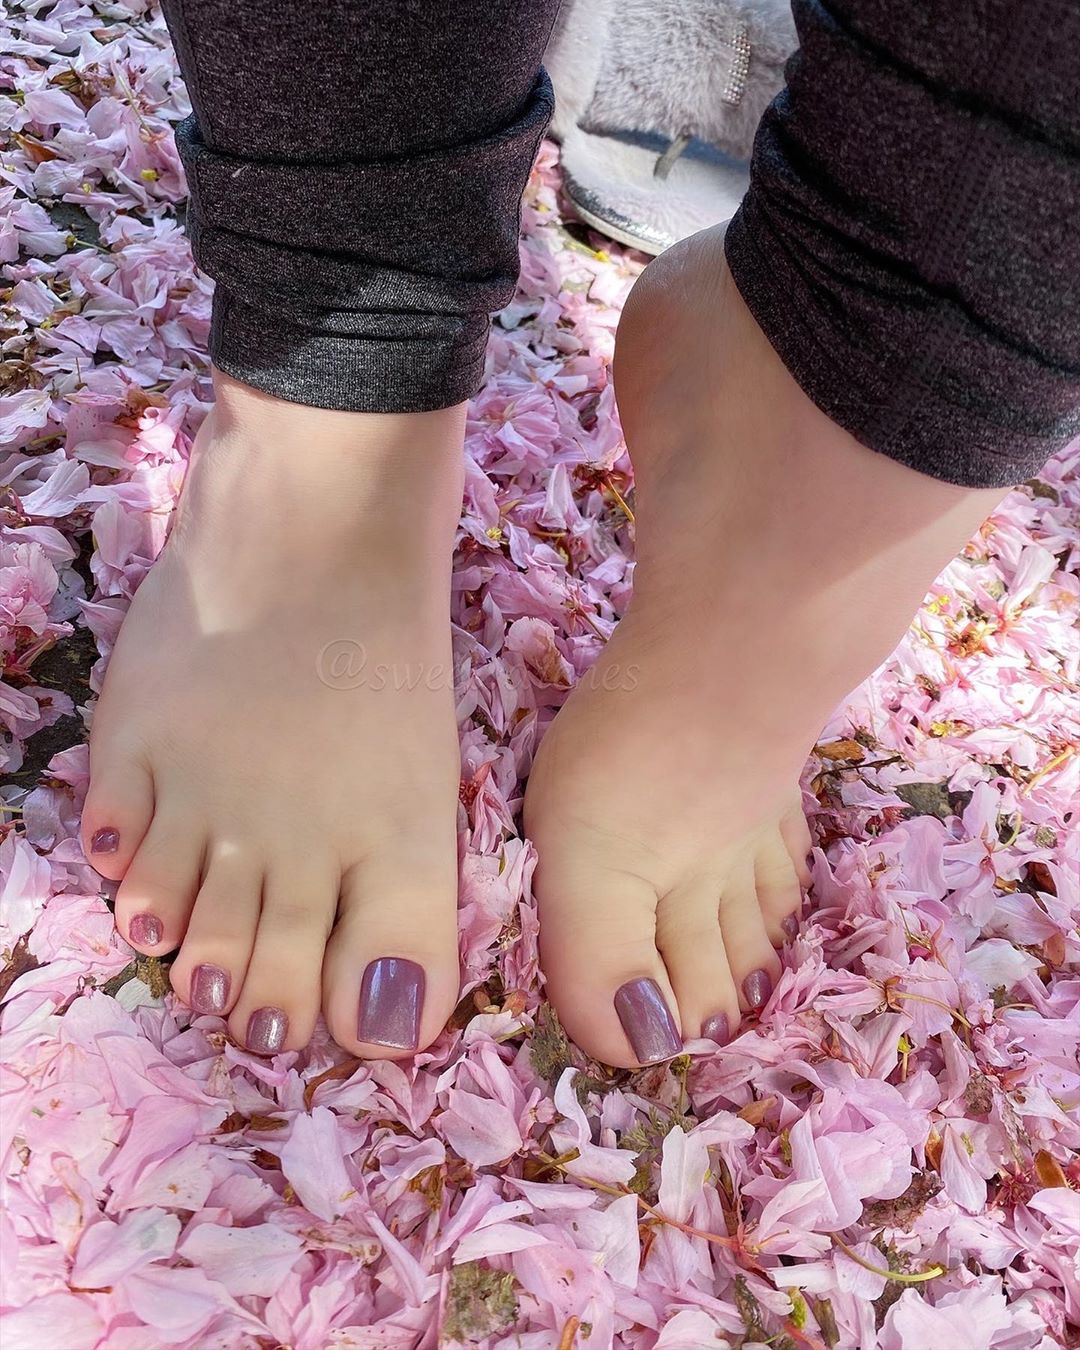 American Woman Earns $6,000 Per Month By Selling Pictures of Her Feet Online